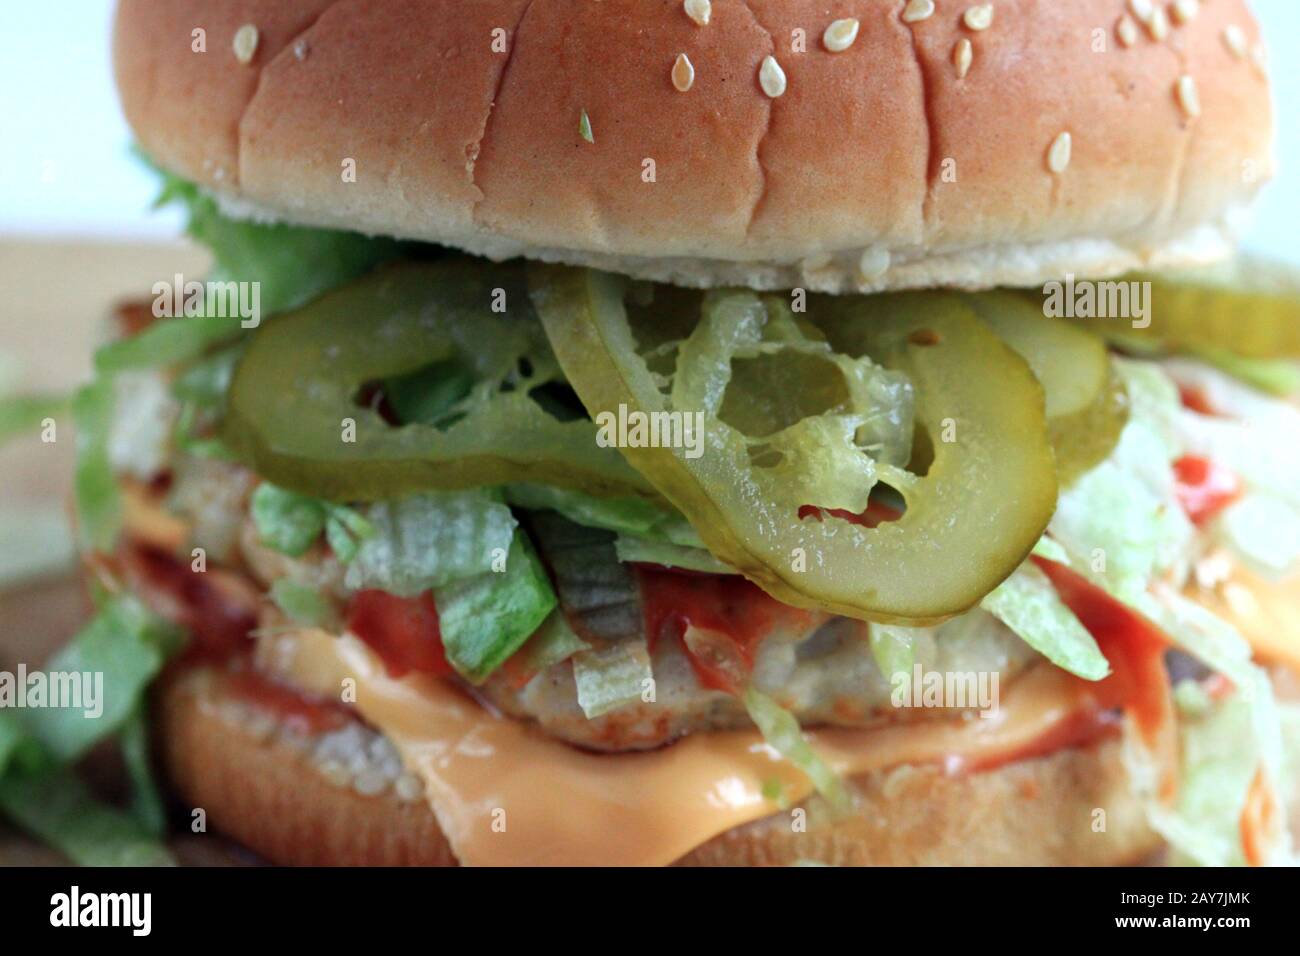 A delicious home-made hamburger with meat and vegetables.Tasty  A delicious home-made hamburger with meat and vegetables.Tasty sandwich with vegetable Stock Photo